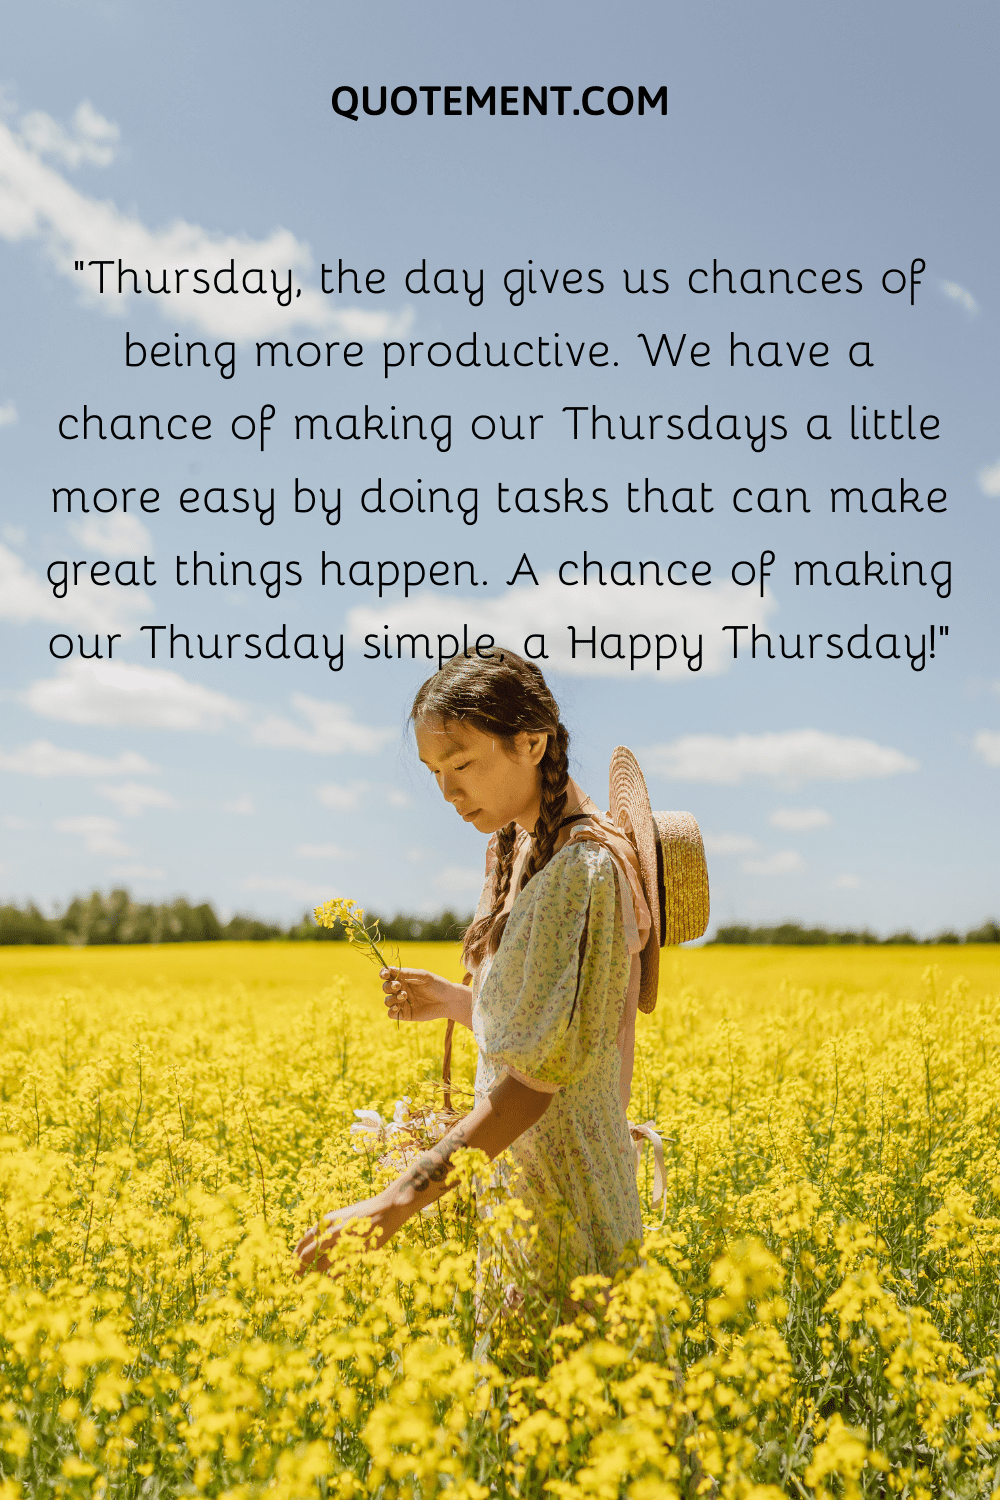 Thursday, the day gives us chances of being more productive